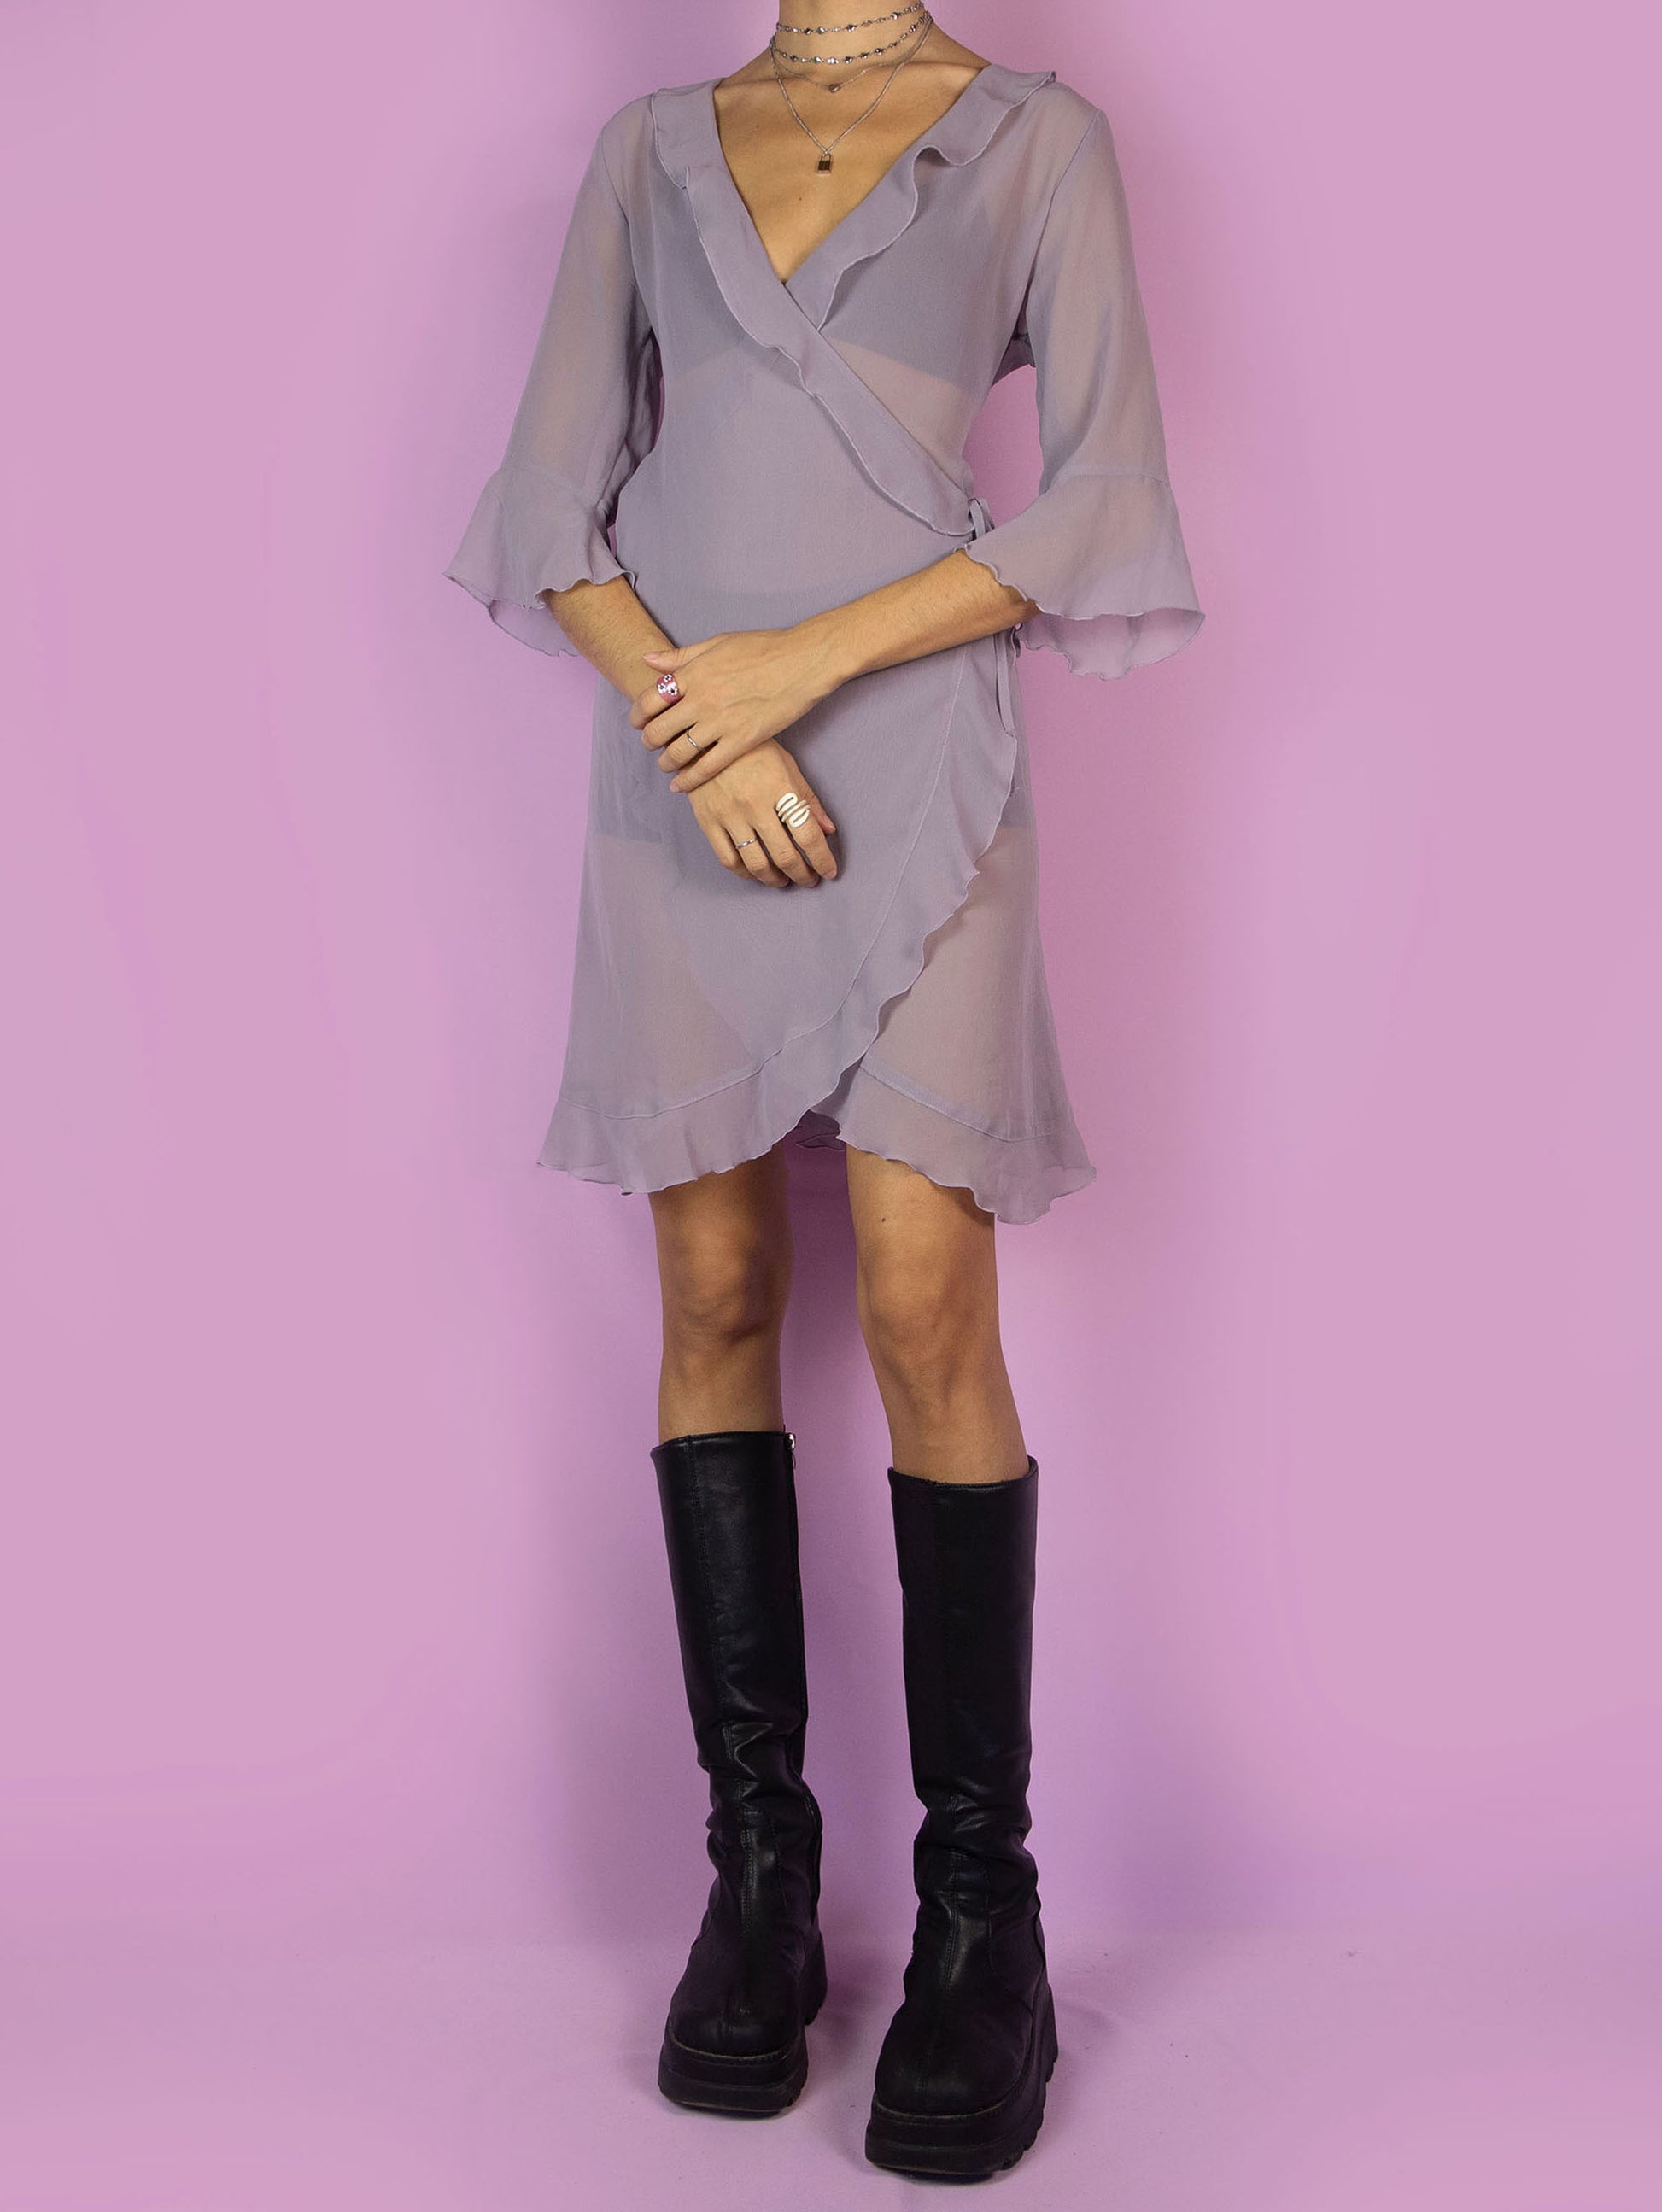 The Y2K Purple Sheer Duster Robe is a vintage dusty purple semi-transparent robe with ruffles, wrapped and tied at the side. Romantic coquette 2000s peignoir jacket.